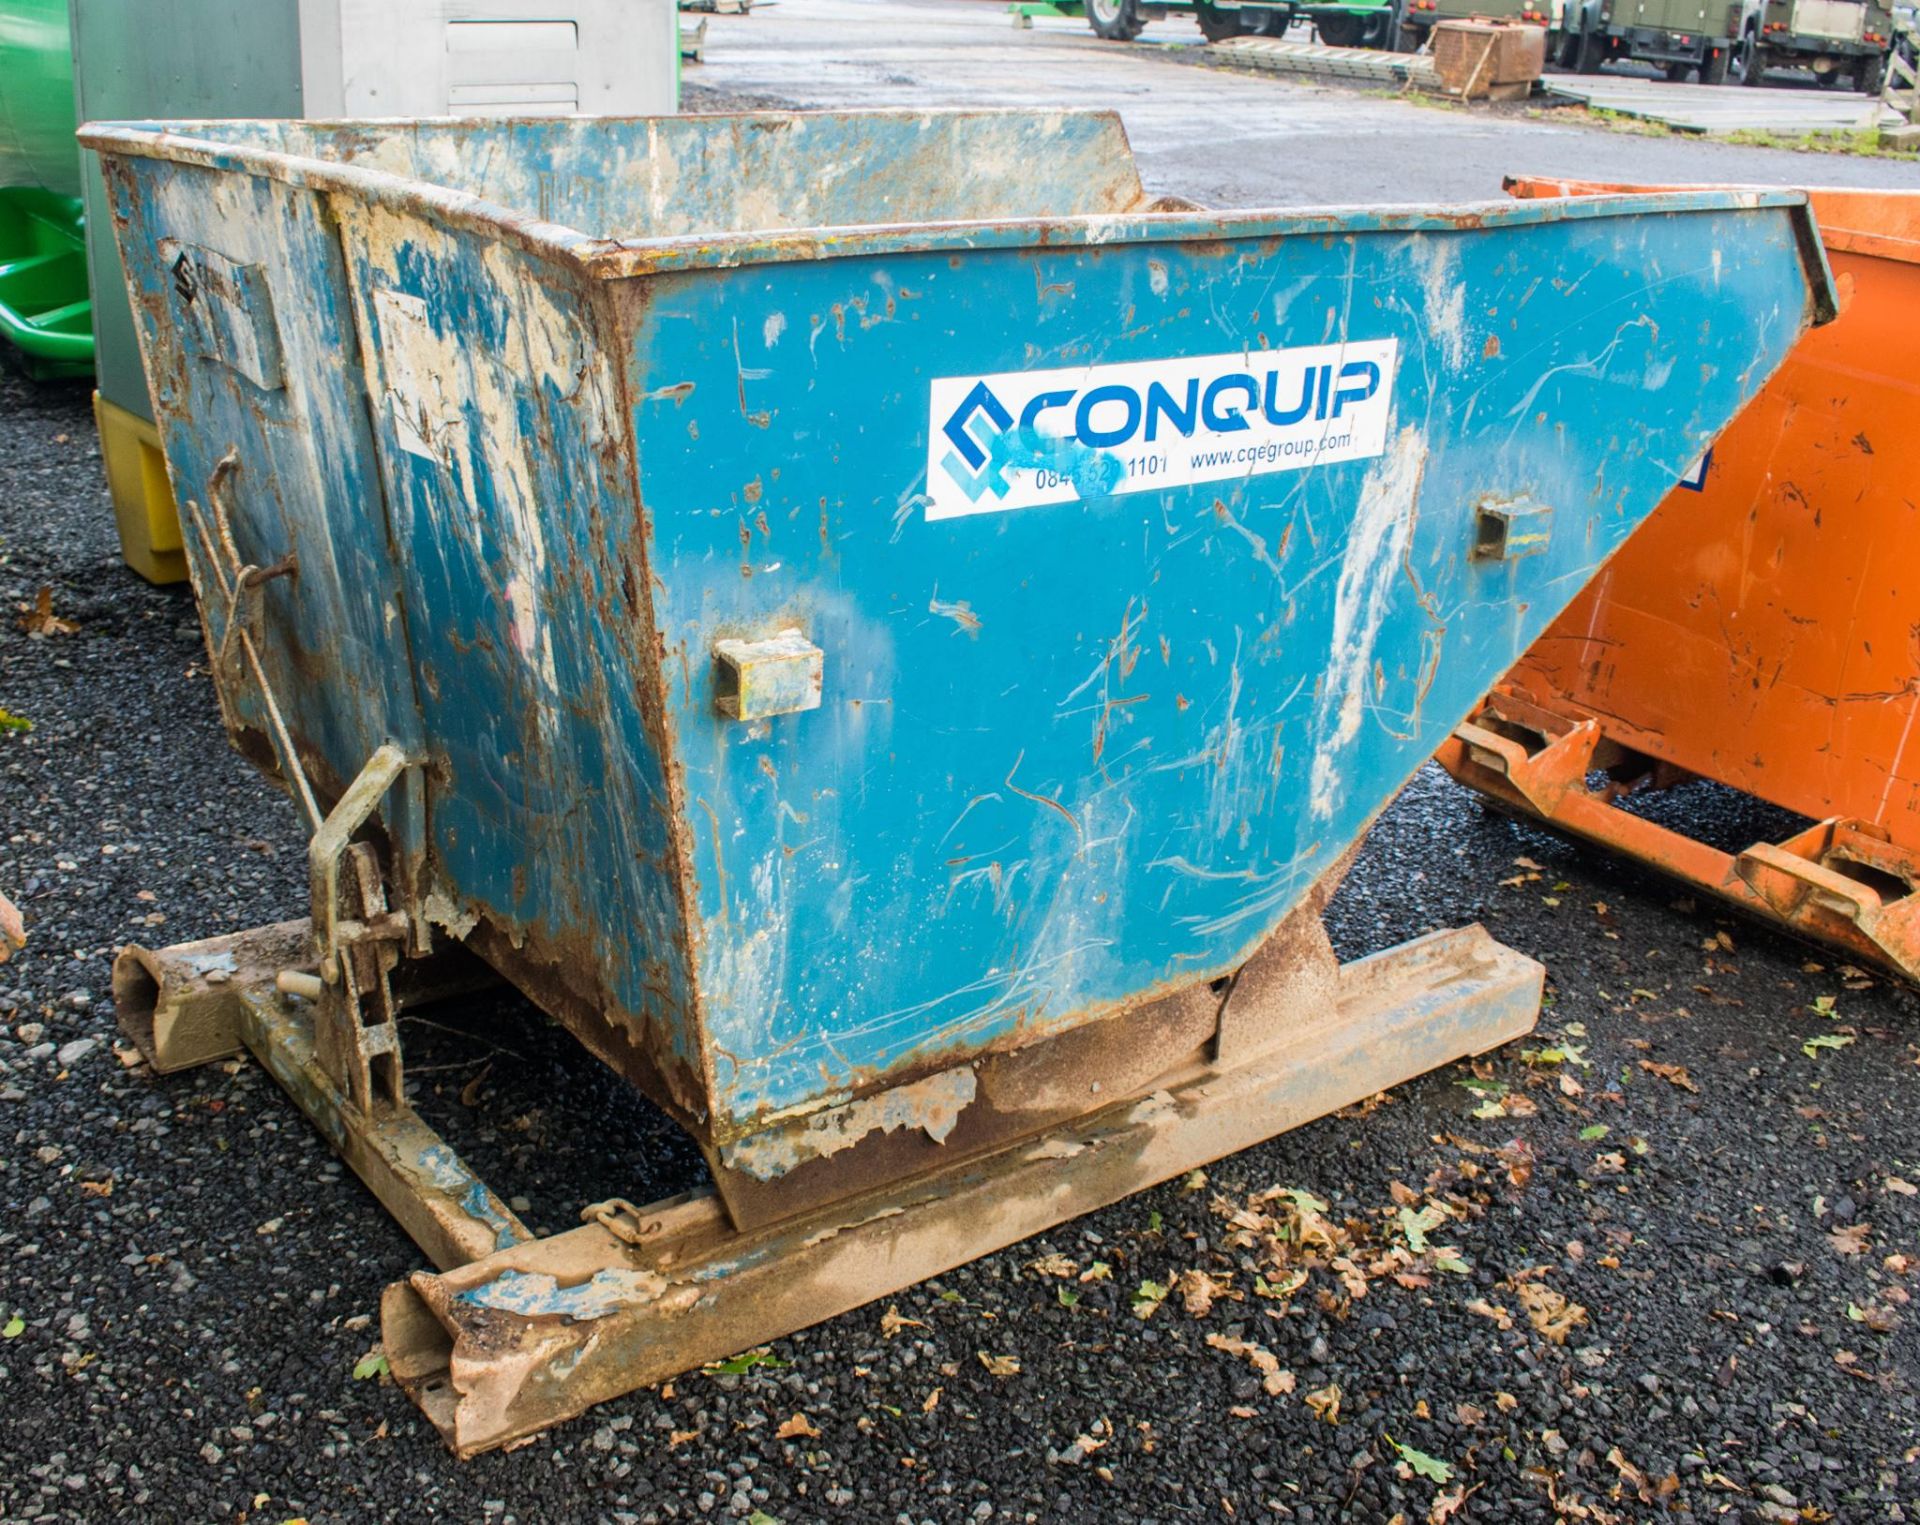 Conquip fork lift tipping skip - Image 3 of 3